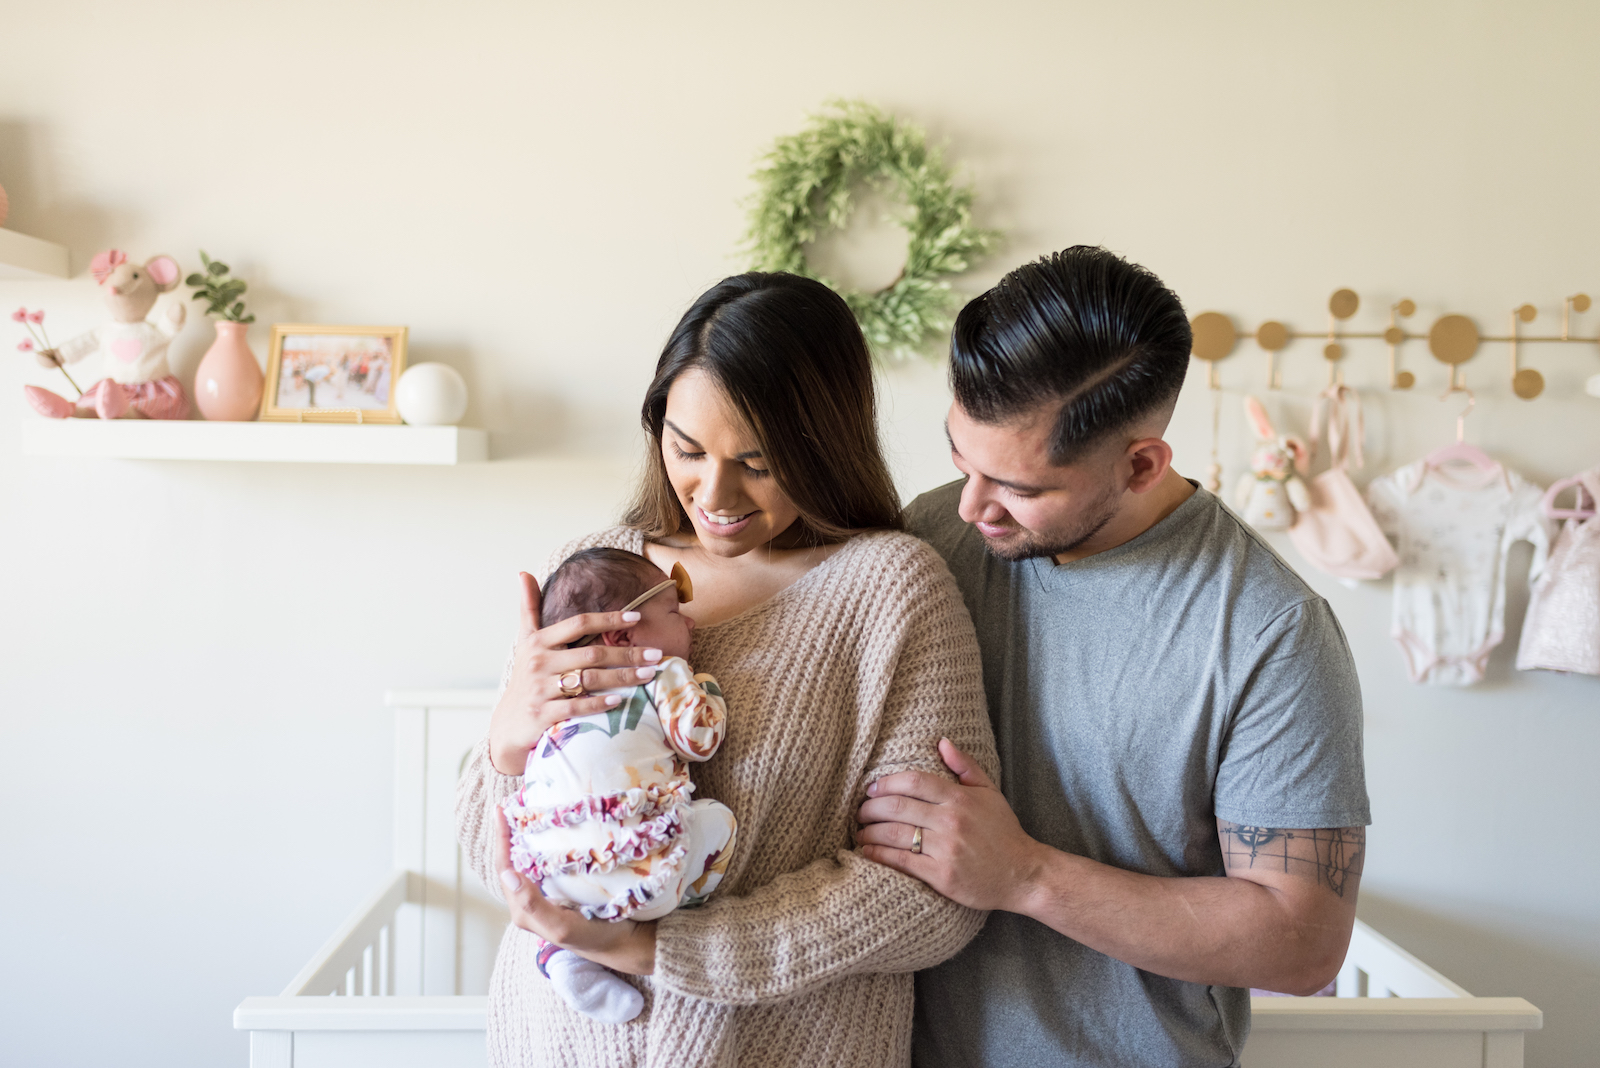 In-home Newborn Session in Pink and Floral Themed Nursery from Mandy Liz Photography